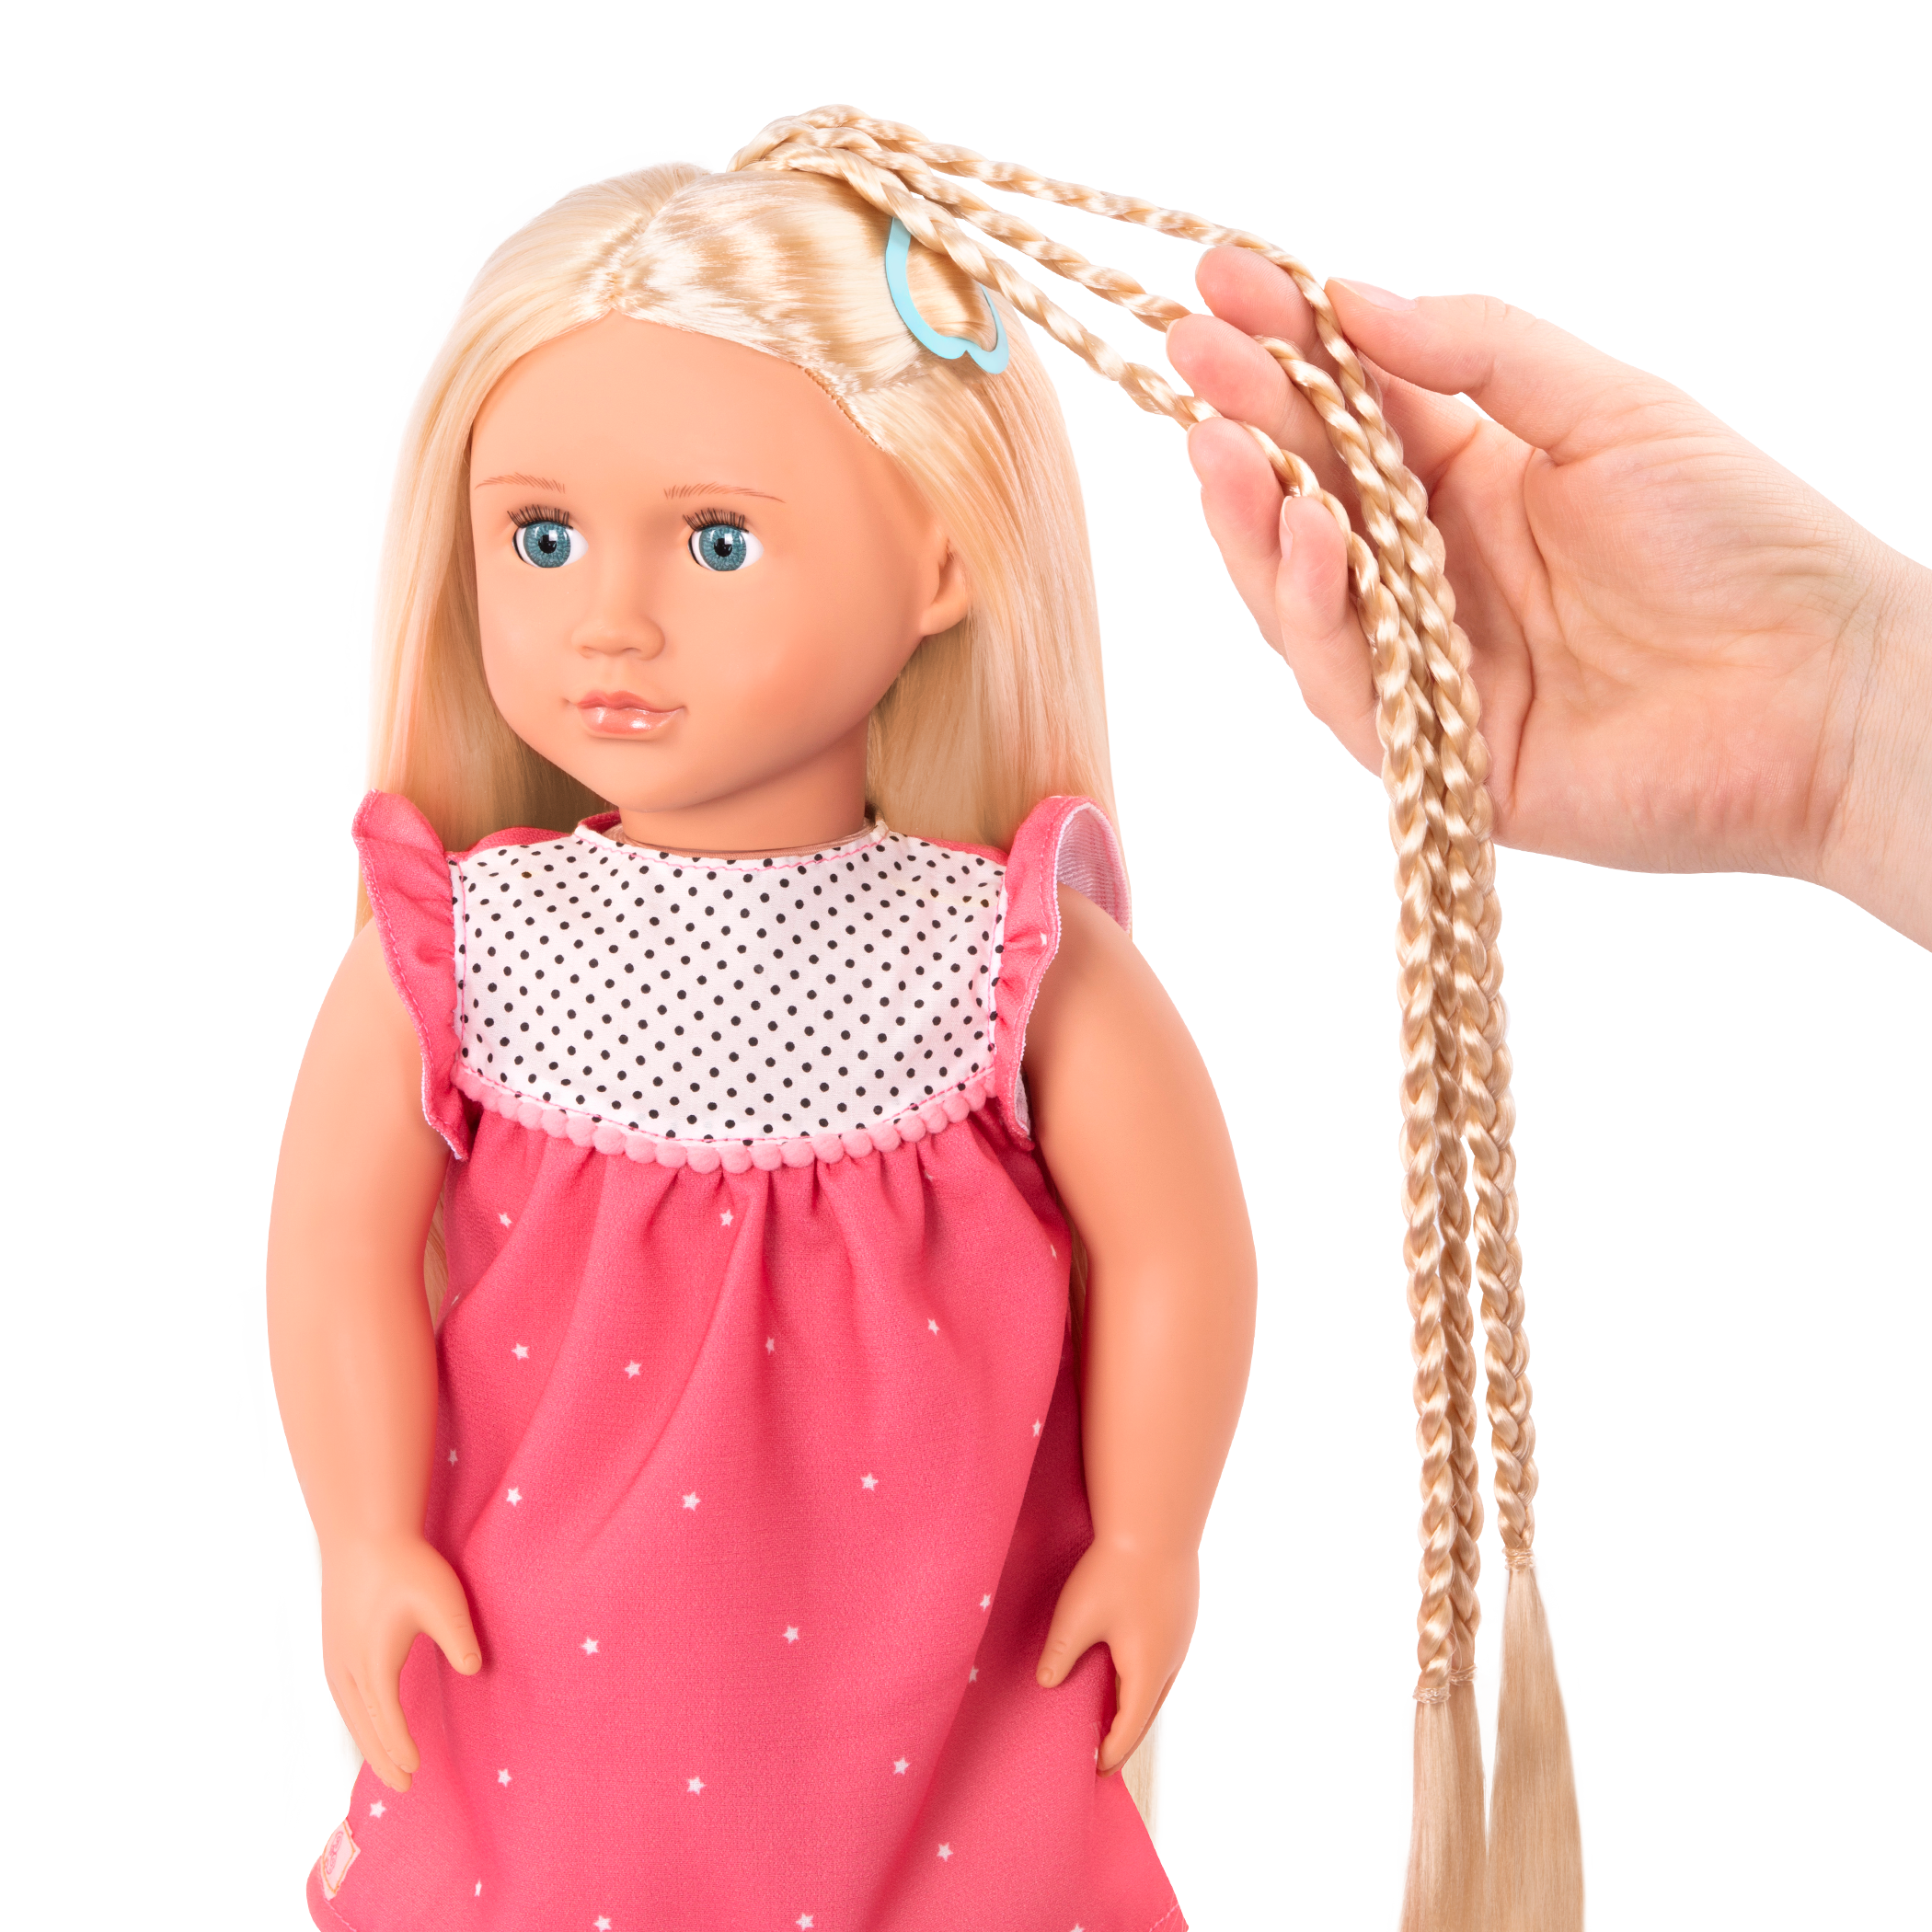 18-inch doll with blonde hair, blue eyes and extensions